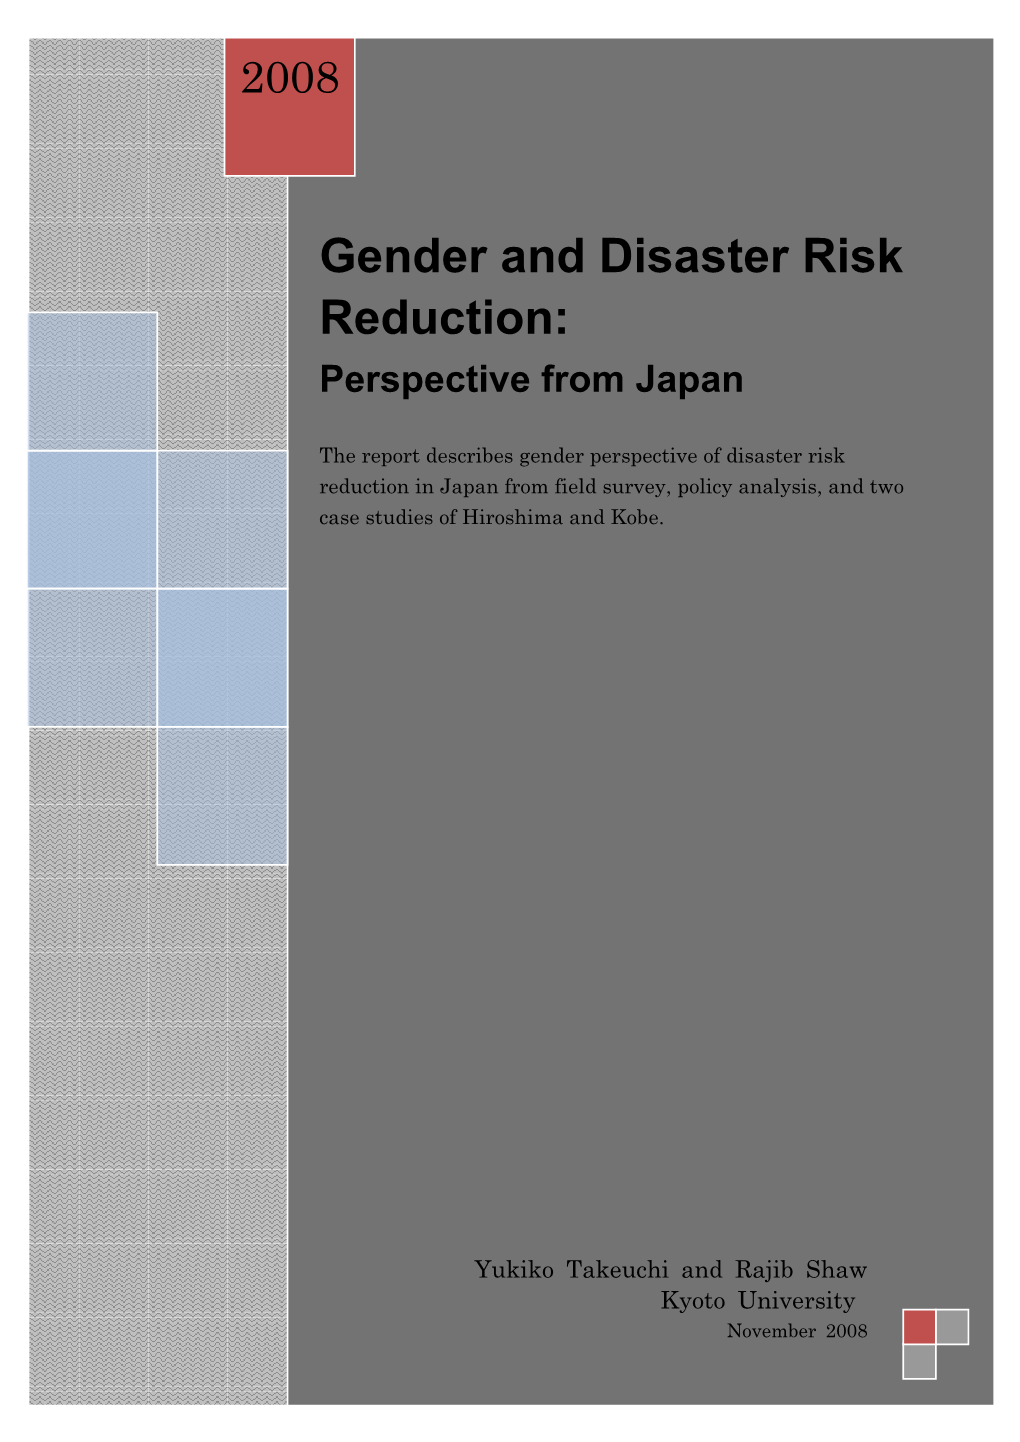 Gender and Disaster Risk Reduction: Perspective from Japan